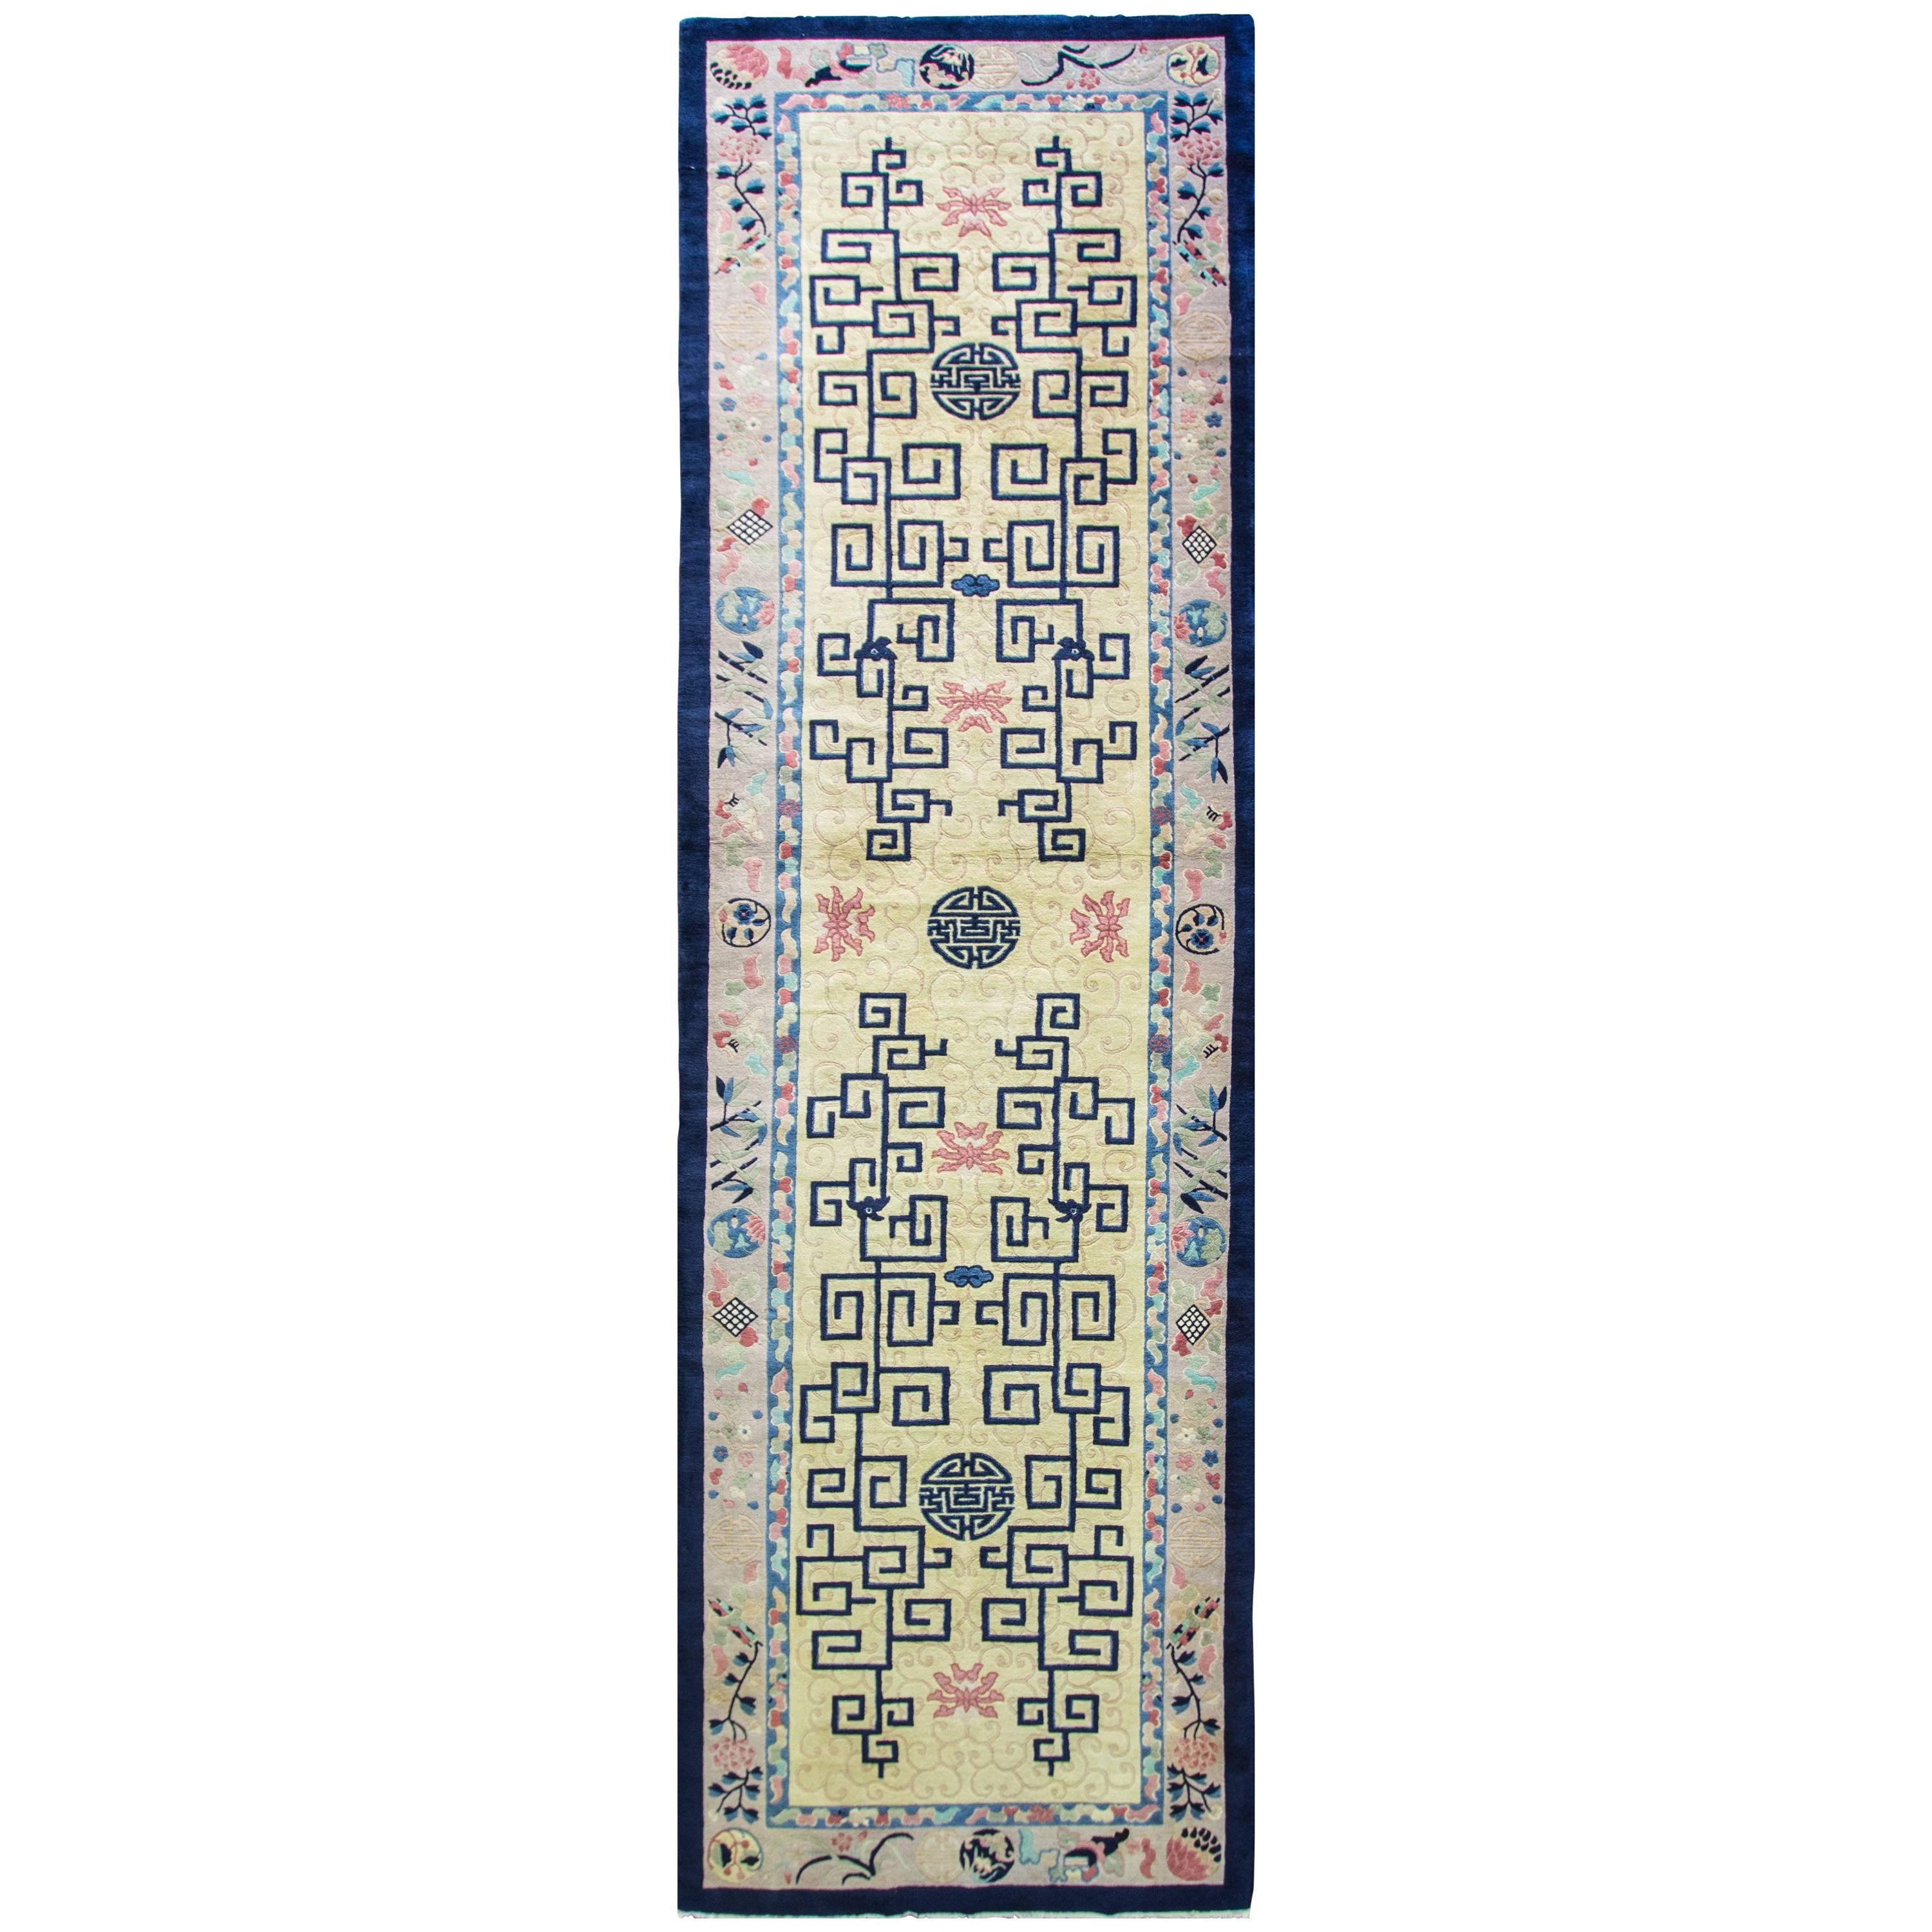 Antique Art Deco Chinese Runner Or Gallery Size Carpet, 5'2" x 17'10" For Sale